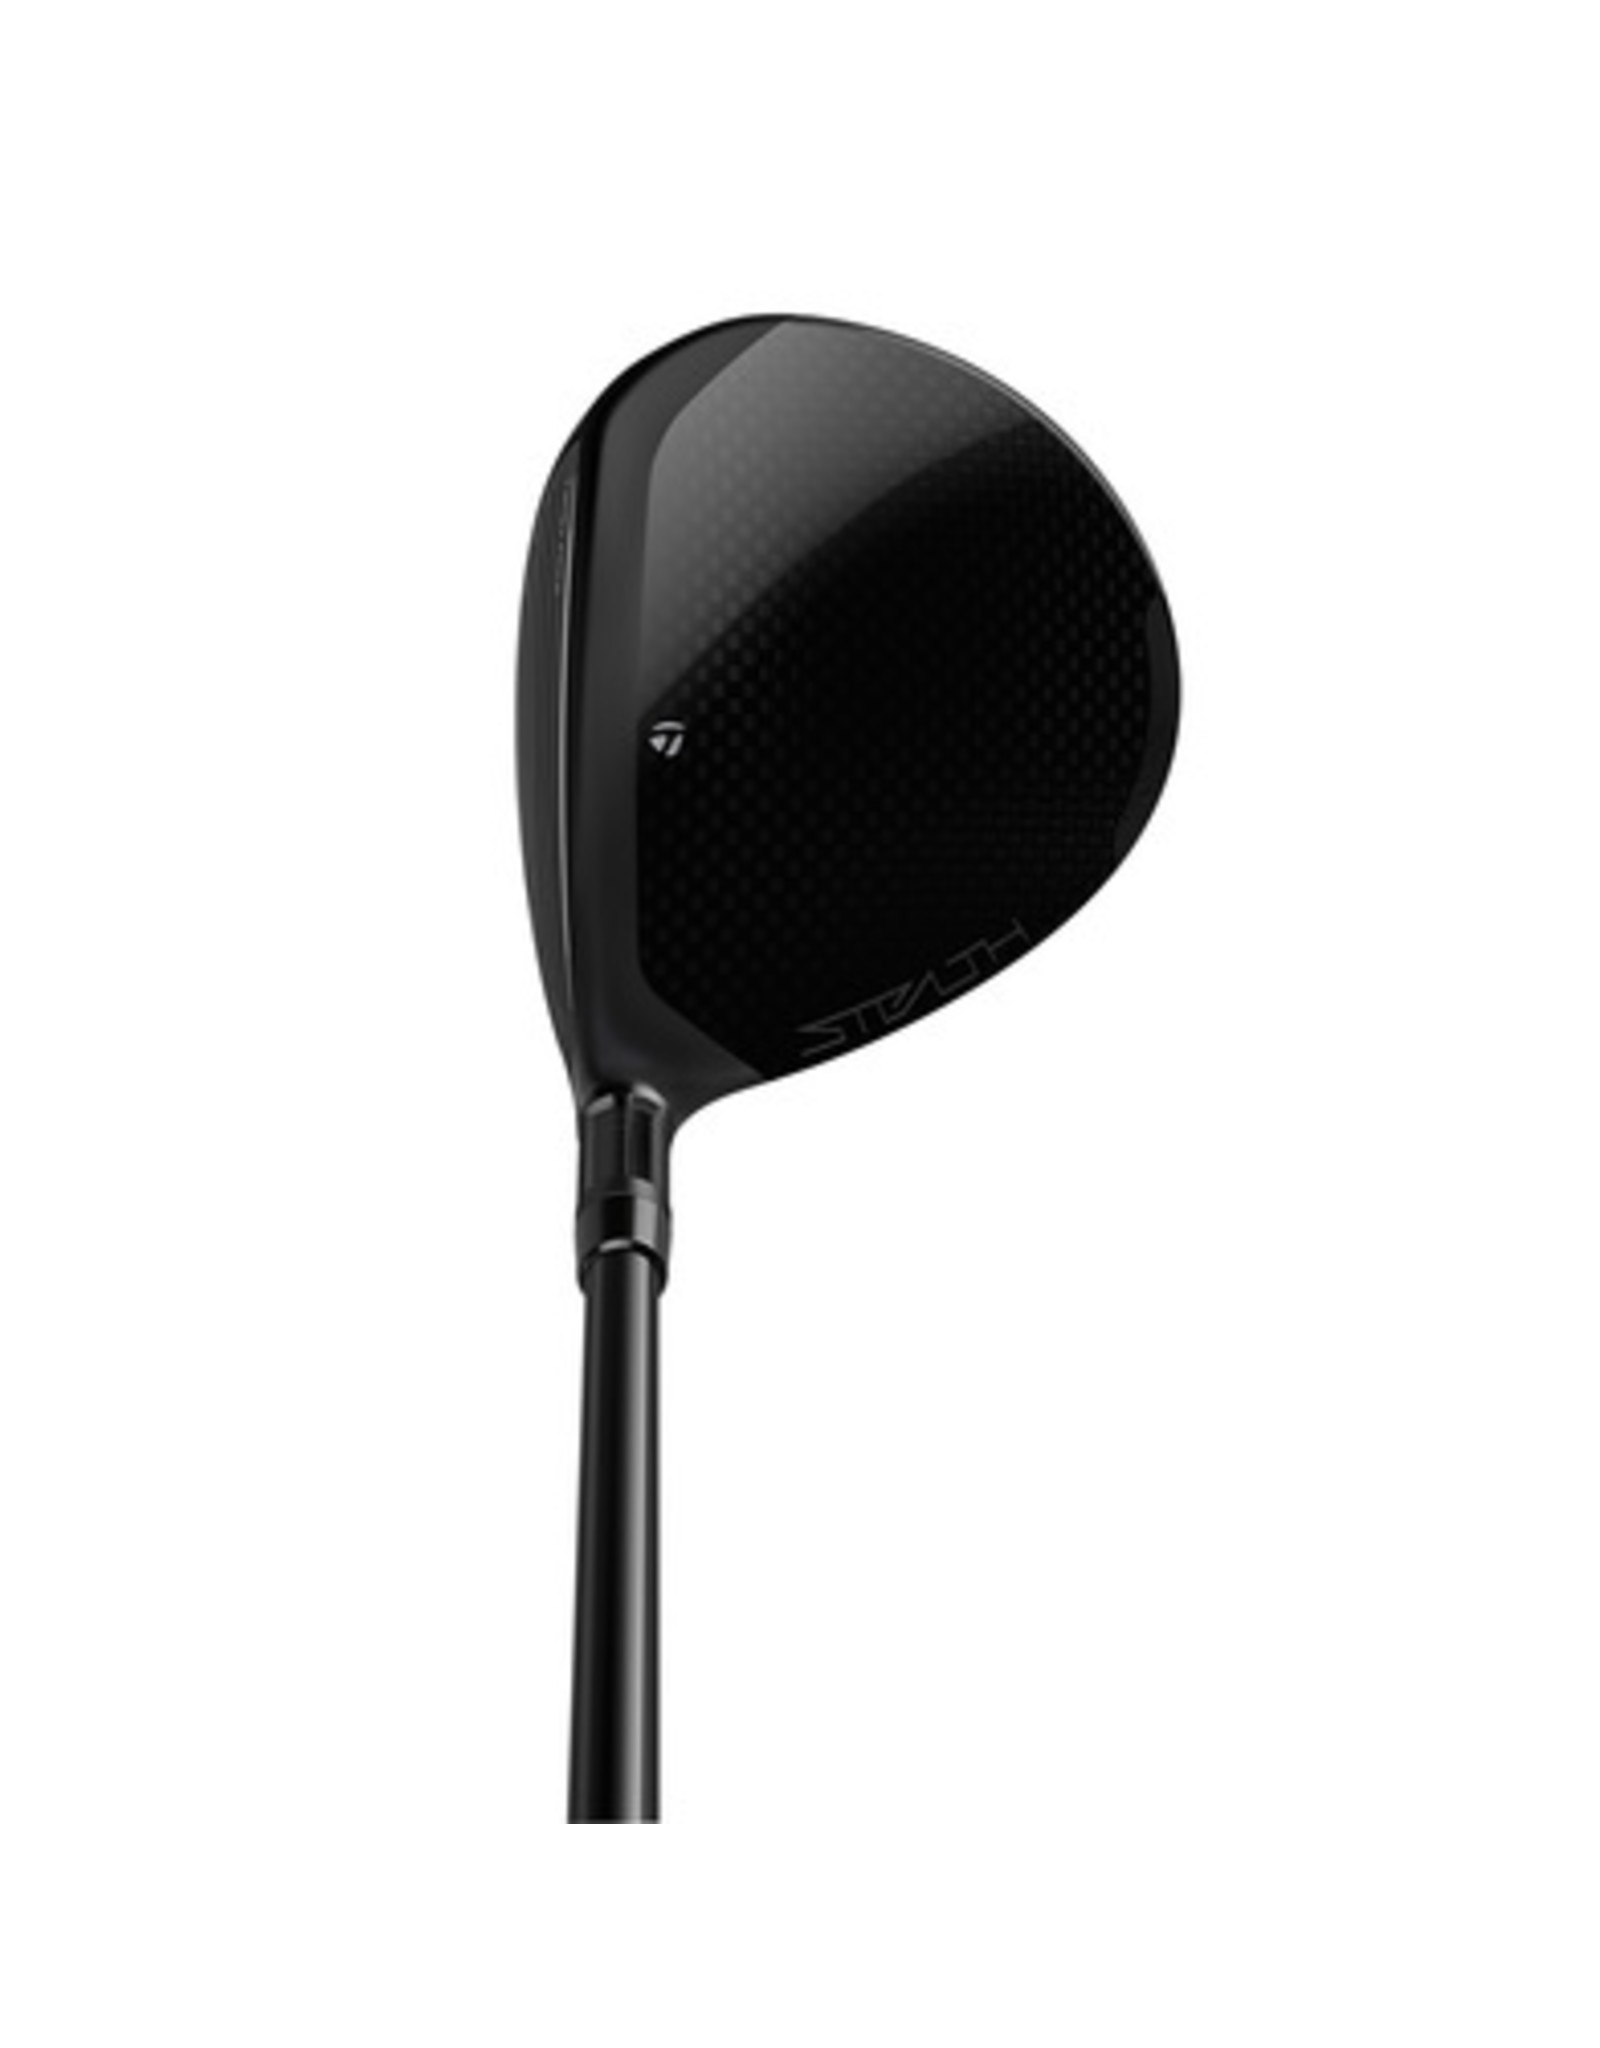 TAYLORMADE TAYLORMADE 2023 STEALTH 2 FWY